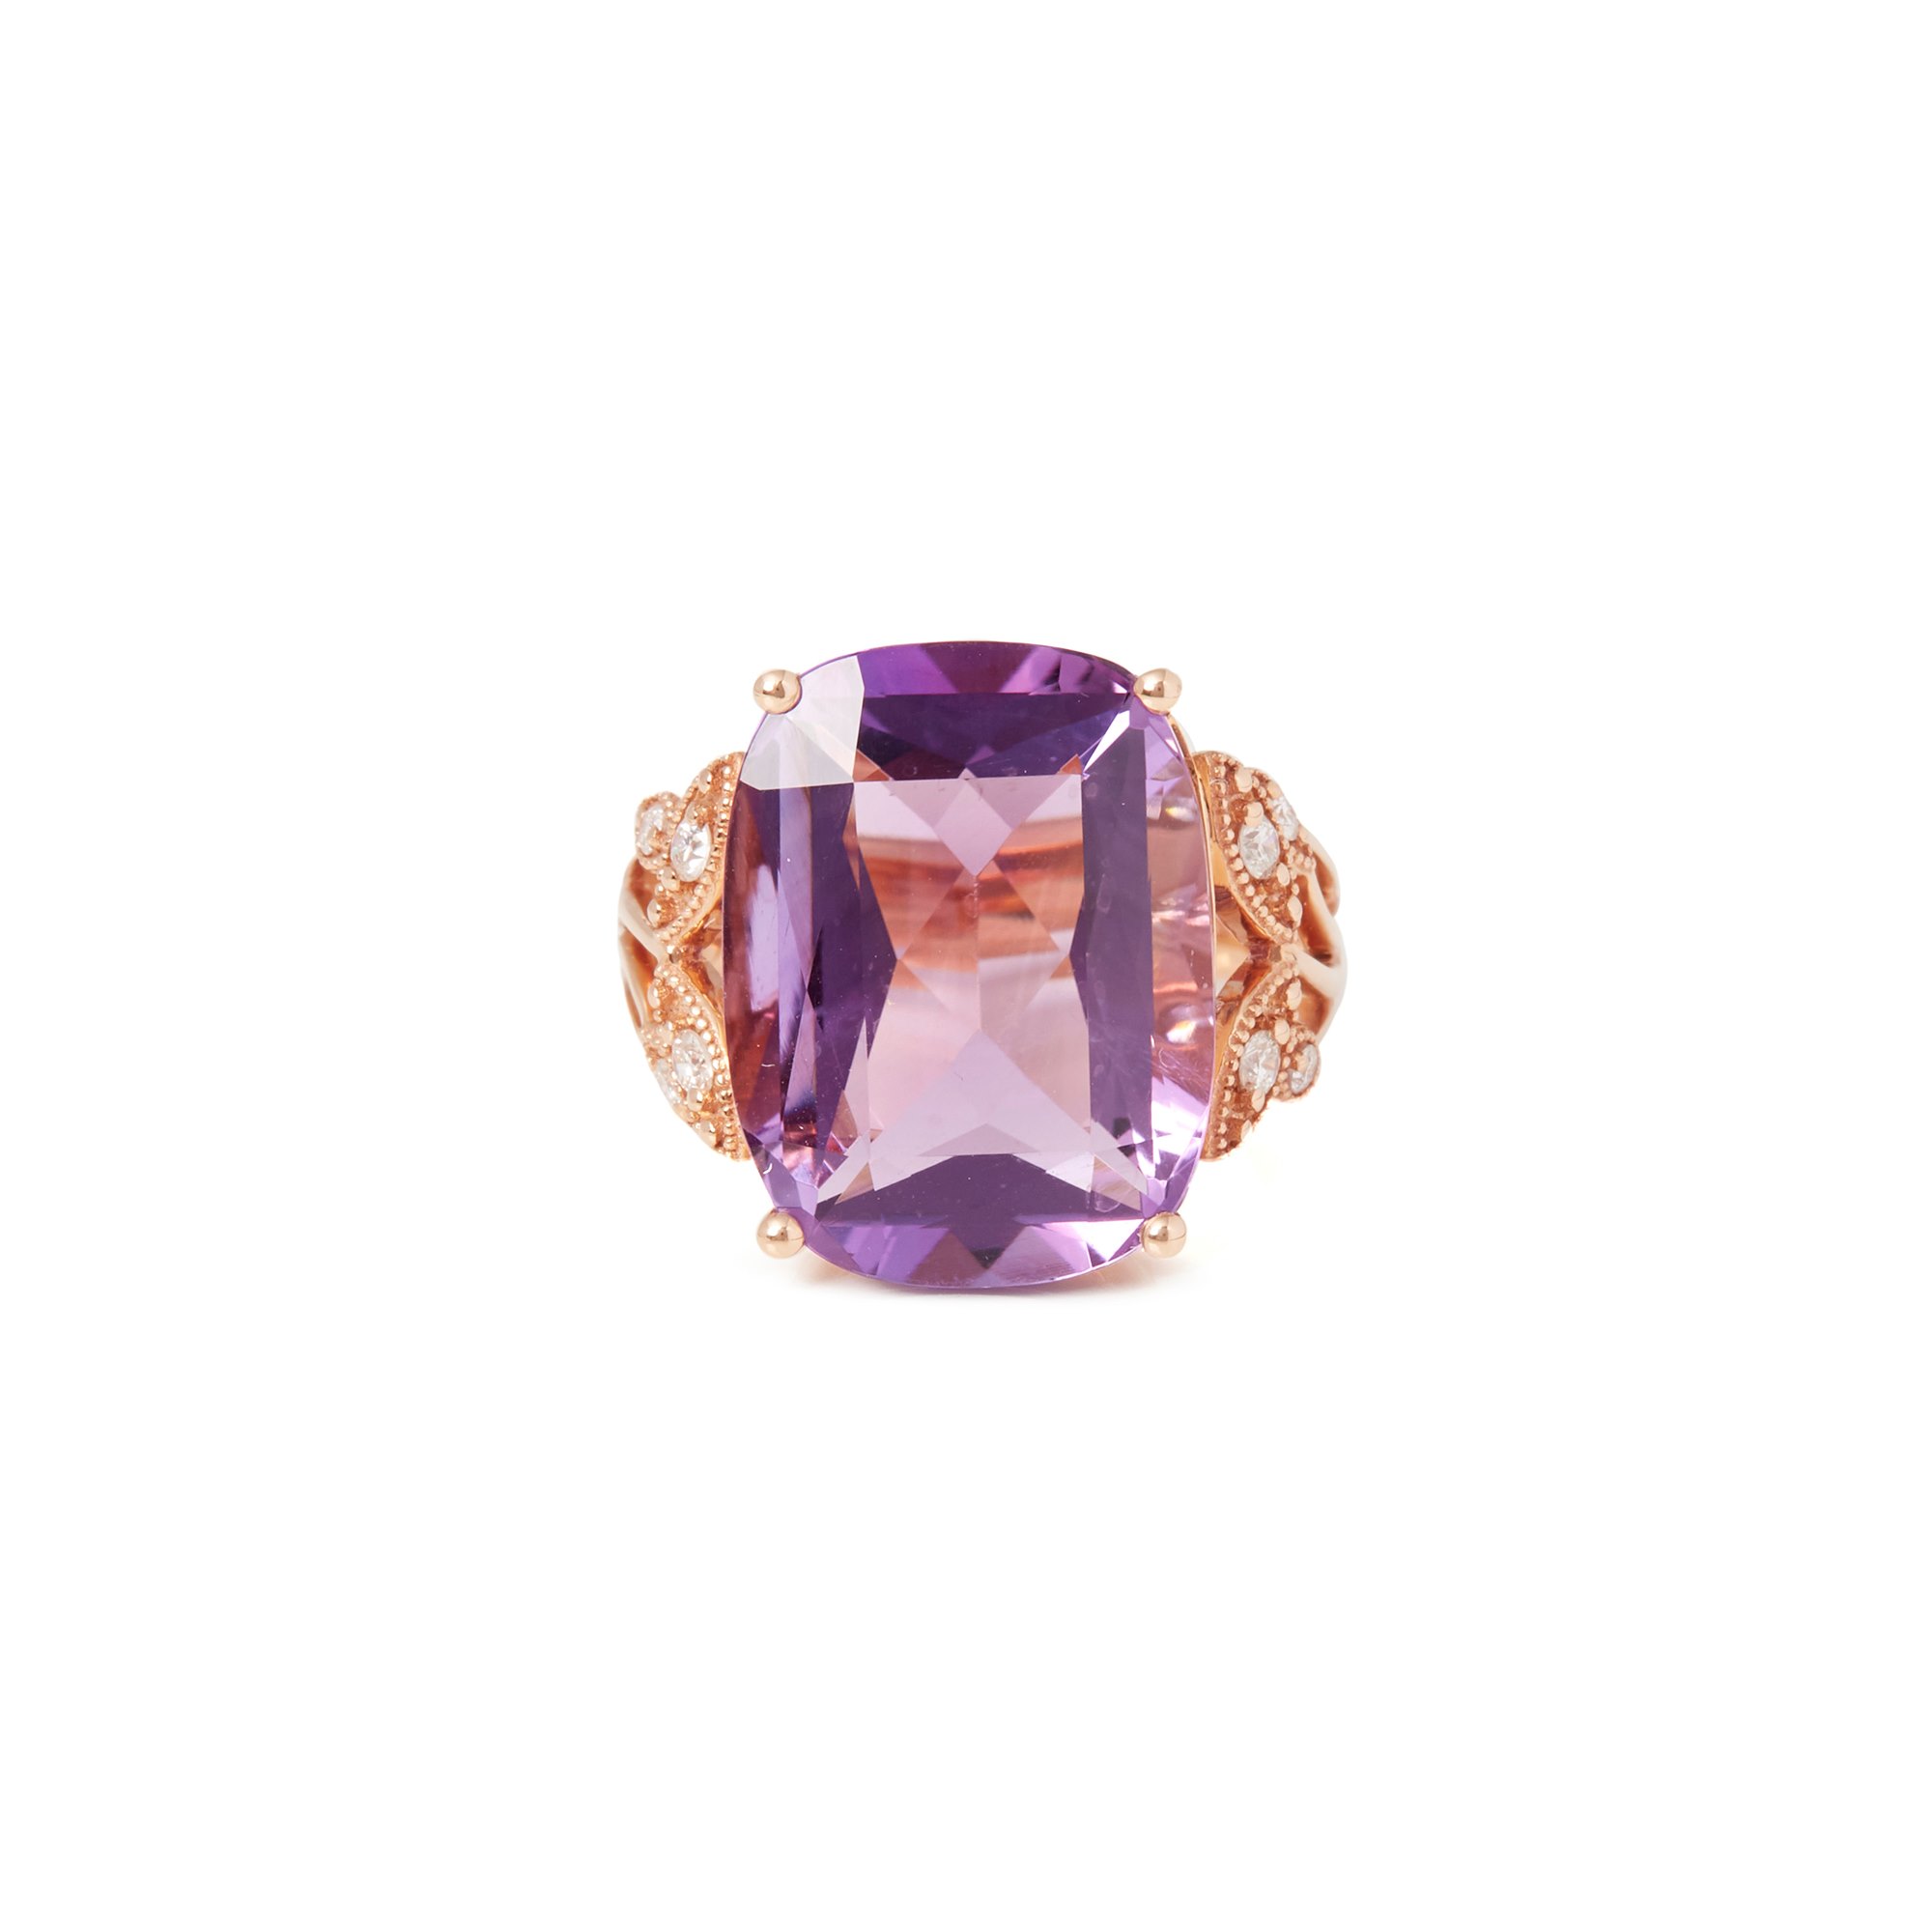 David Jerome Certified 12.74ct Russian Amethyst and Diamond 18ct gold Ring